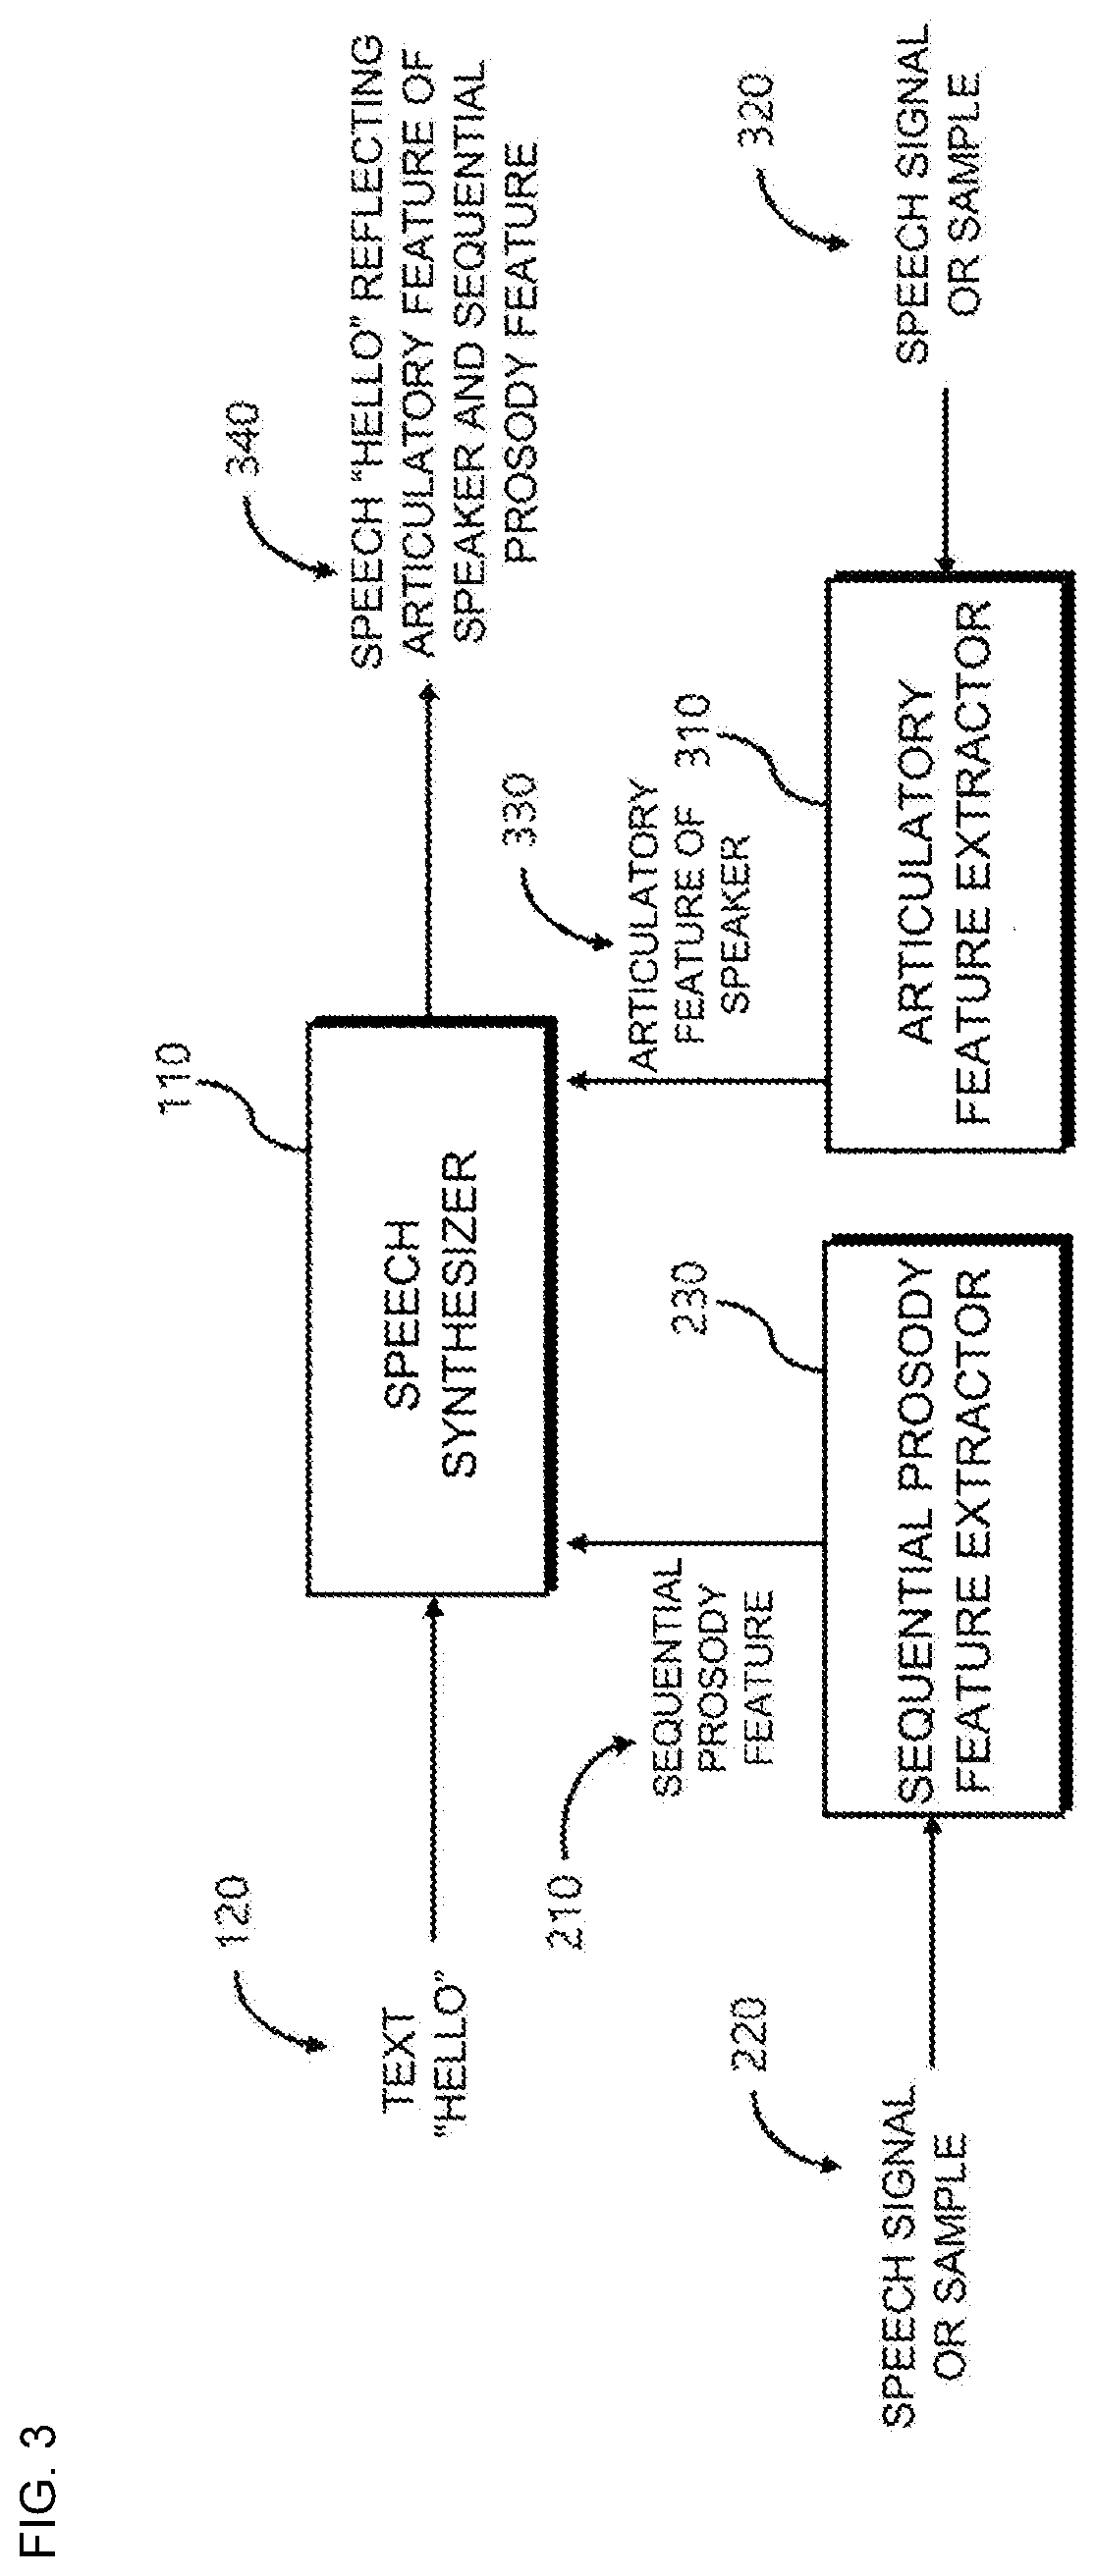 Method, device, and computer readable storage medium for text-to-speech synthesis using machine learning on basis of sequential prosody feature